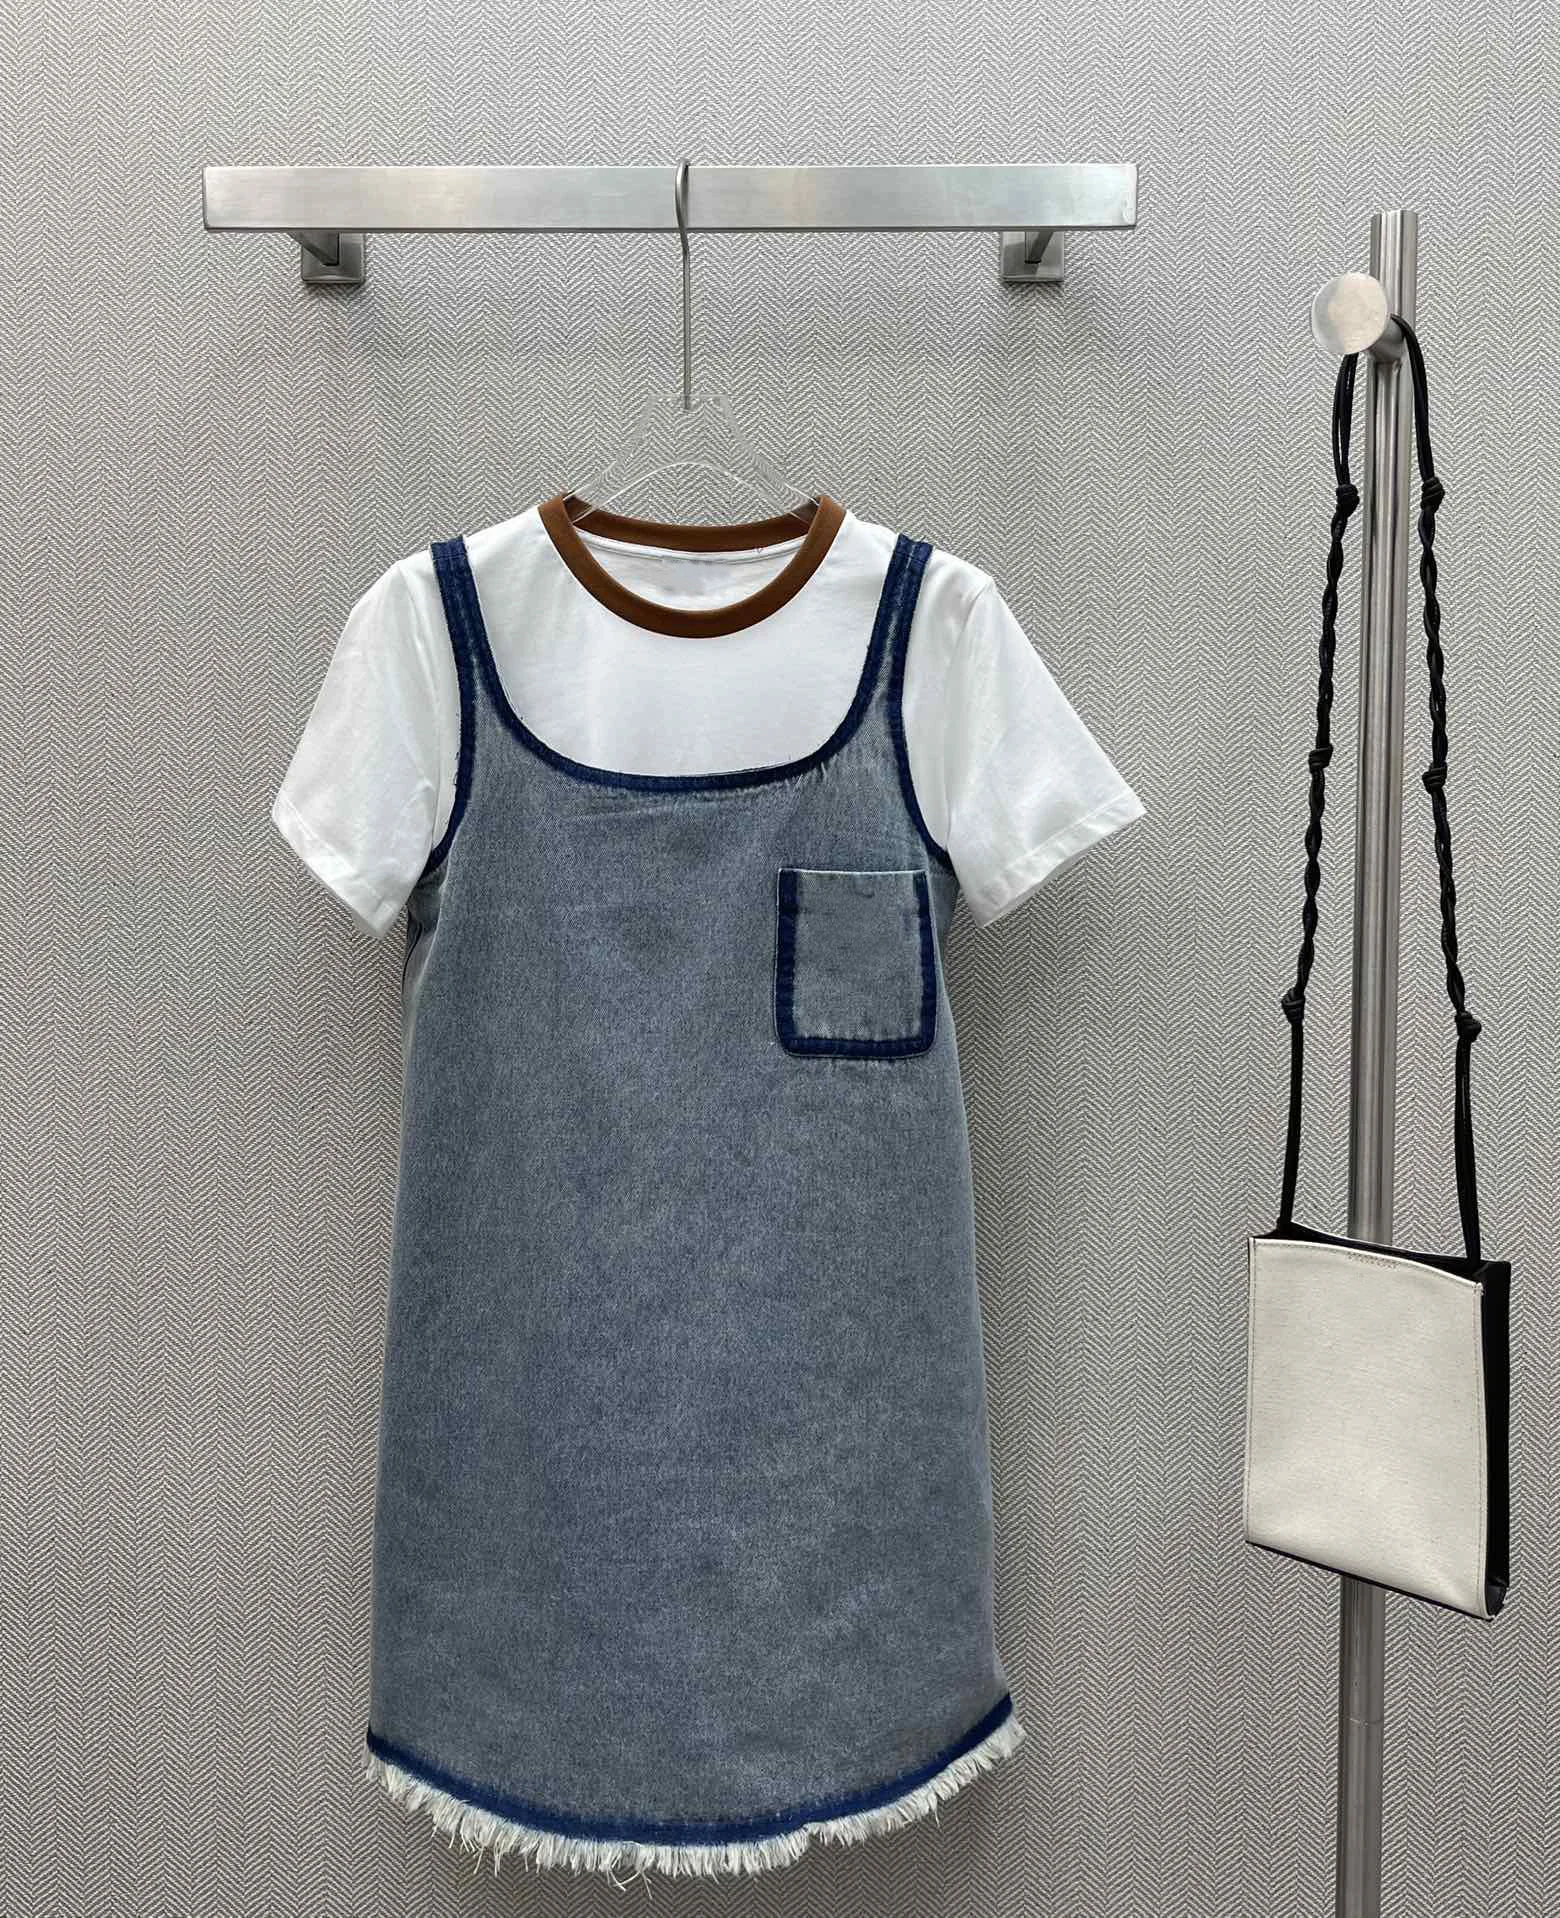 Pocket classic embroidery blue denim sundress to do old edge design wash water is simply nice  5.23